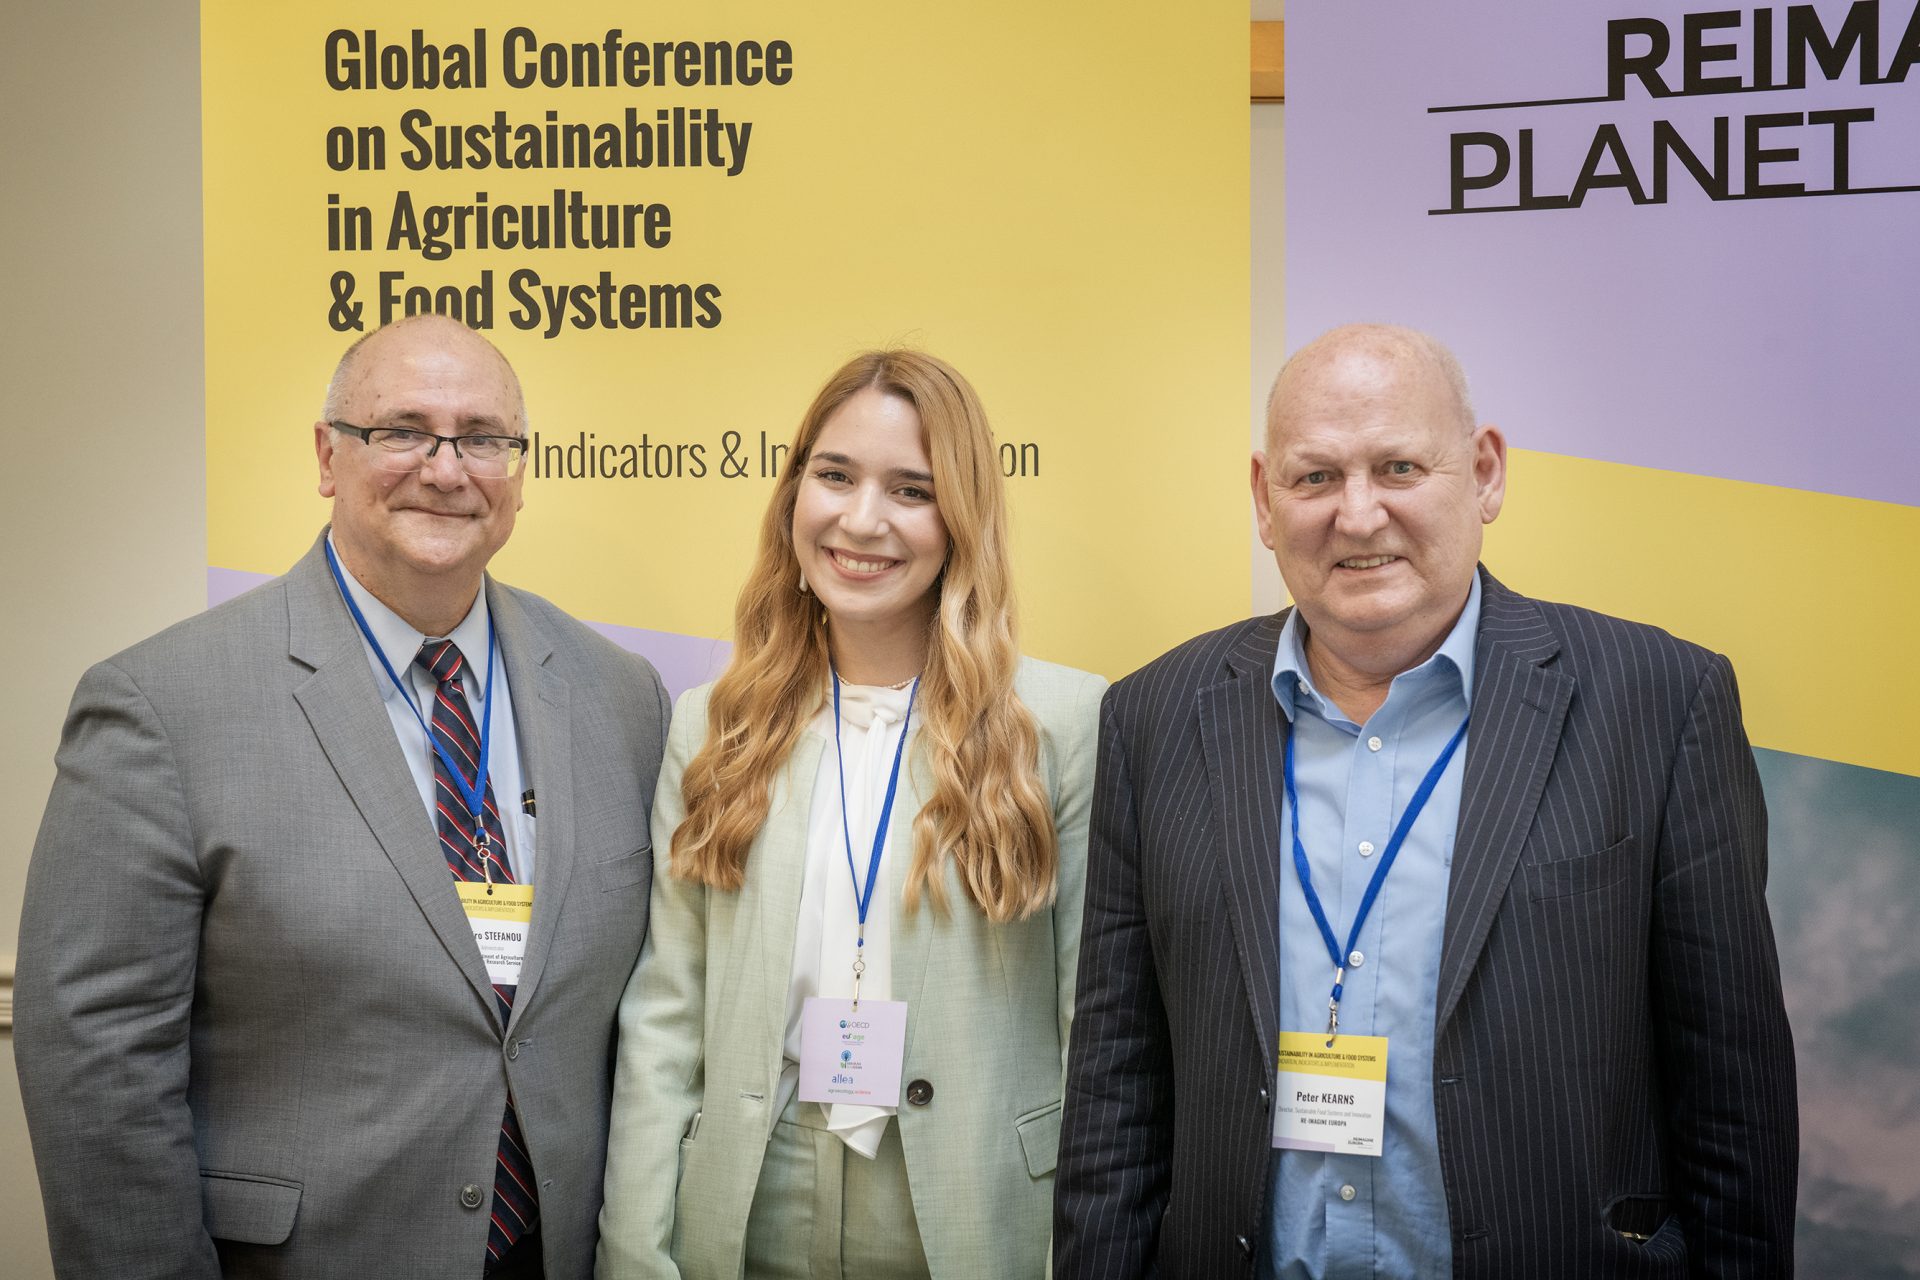 Dr Spiro Stefanou, Lidia Dimitrakopoulou and Peter Kearns posing for a photo